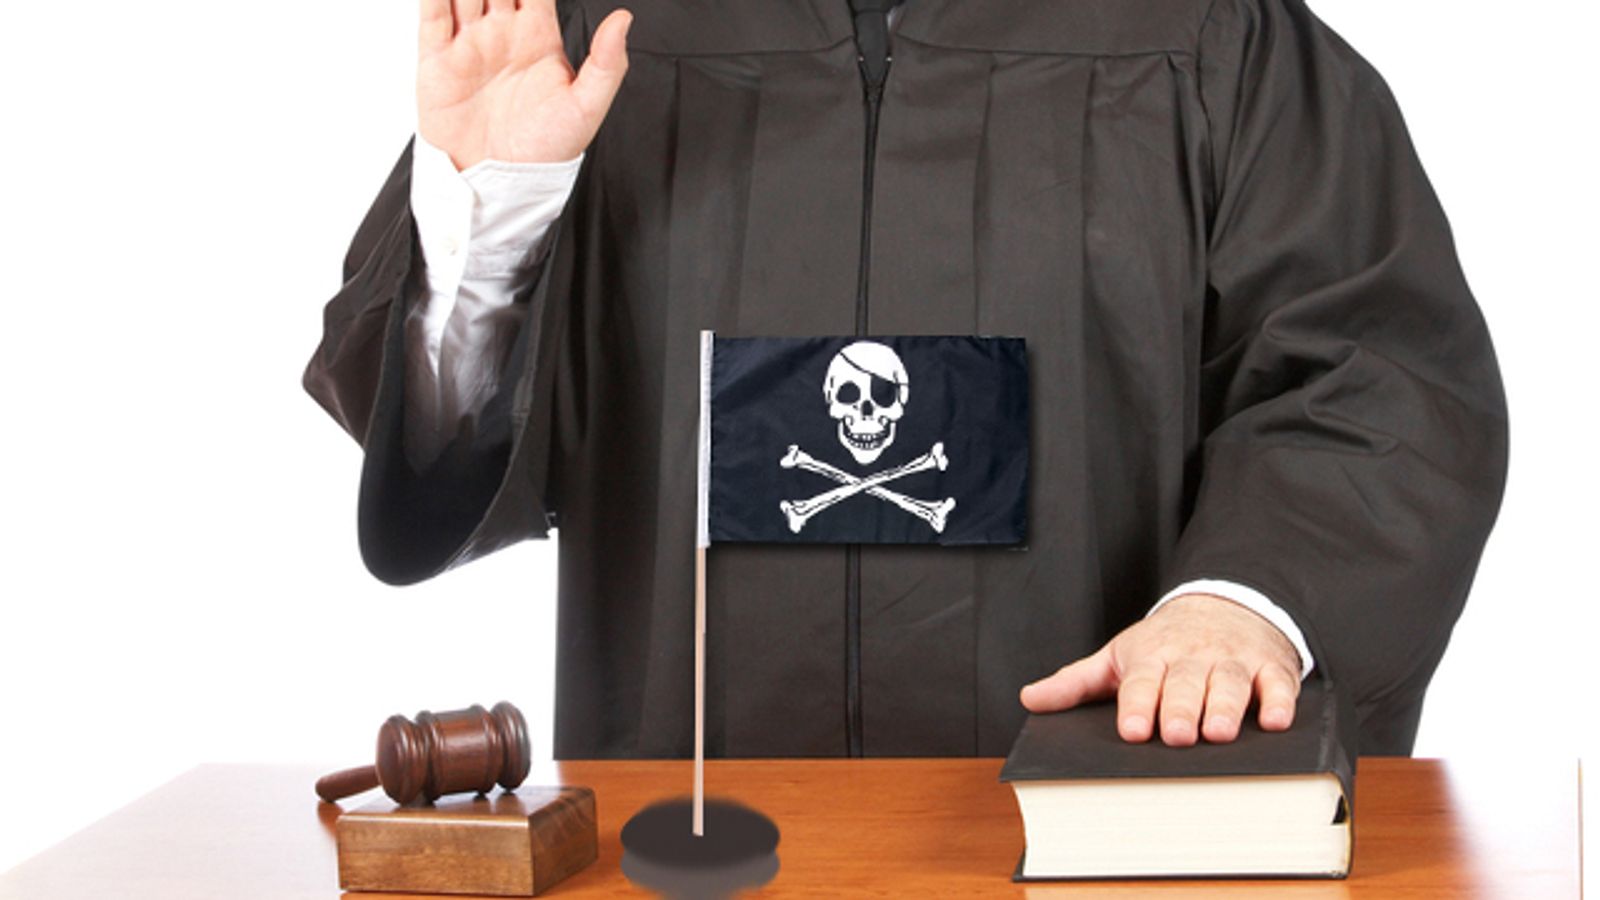 Pirate Bay Appeal Judge Removed for Bias